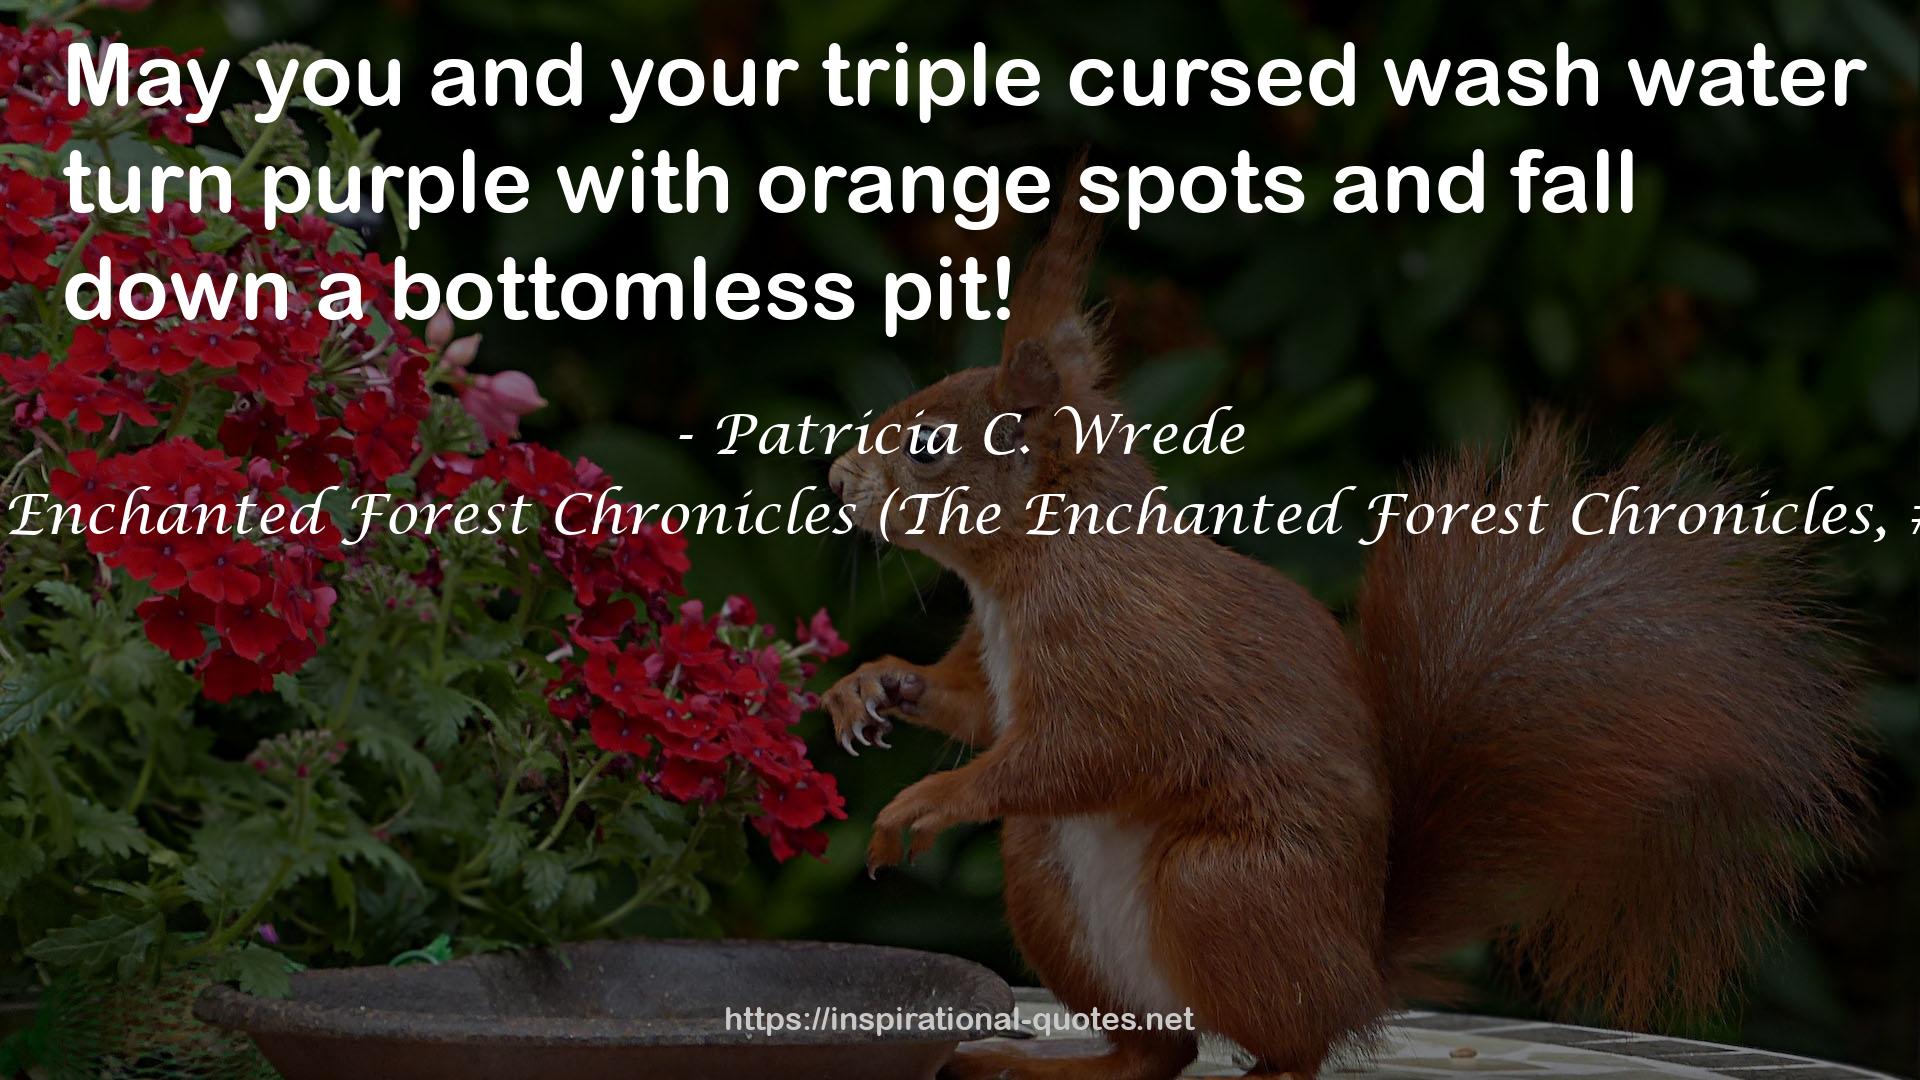 The Enchanted Forest Chronicles (The Enchanted Forest Chronicles, #1-4) QUOTES